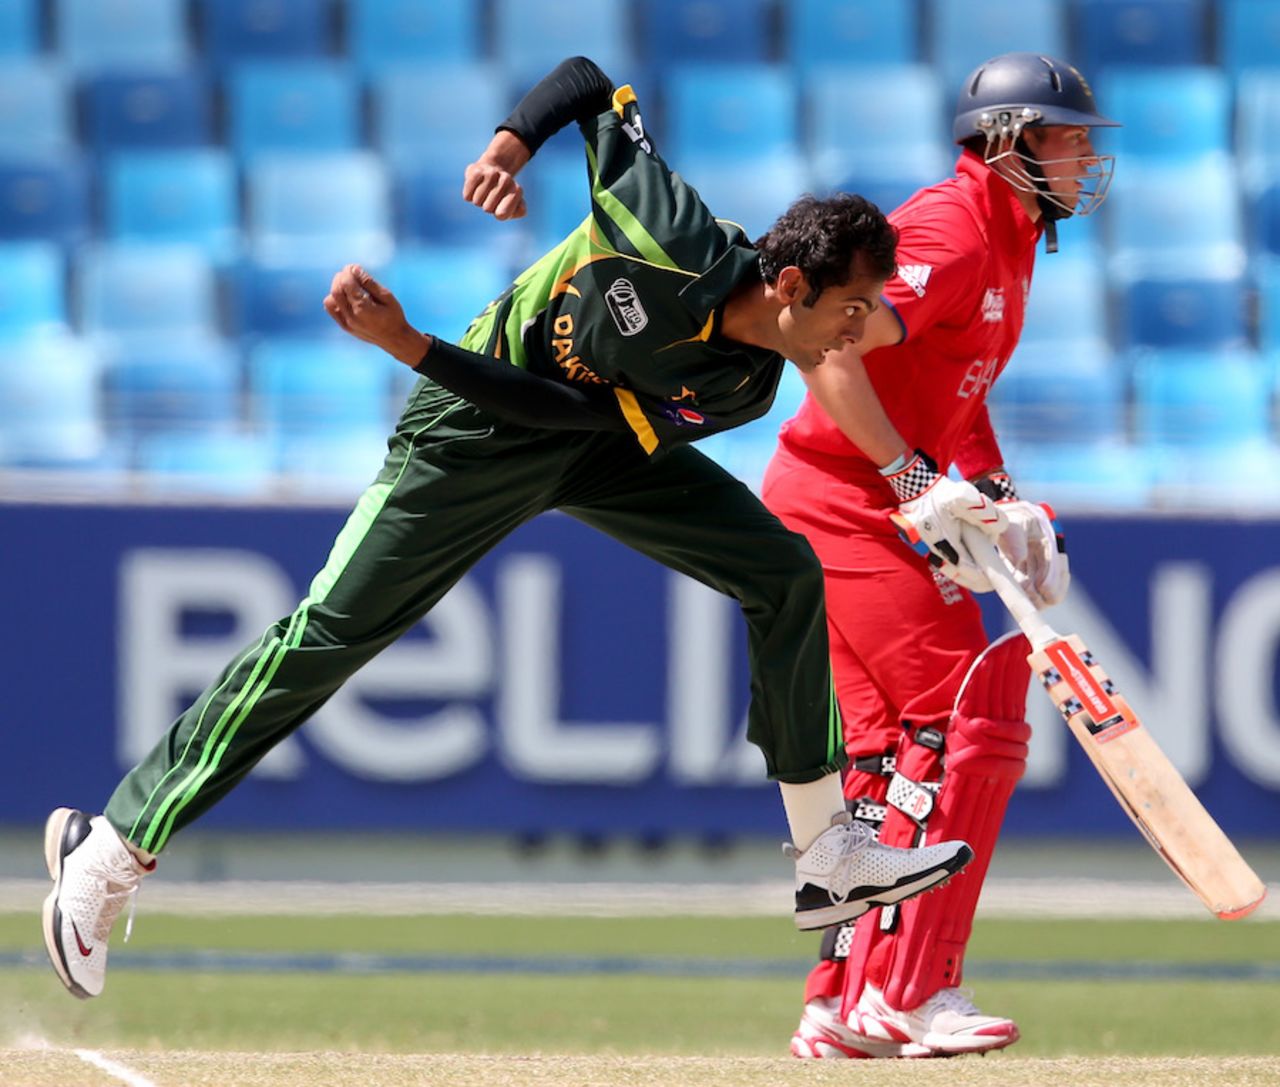 Zia-ul-Haq picked up two wickets in his spell, England v Pakistan, Under-19 World Cup 2014, semi-final, Dubai, February 24, 2014